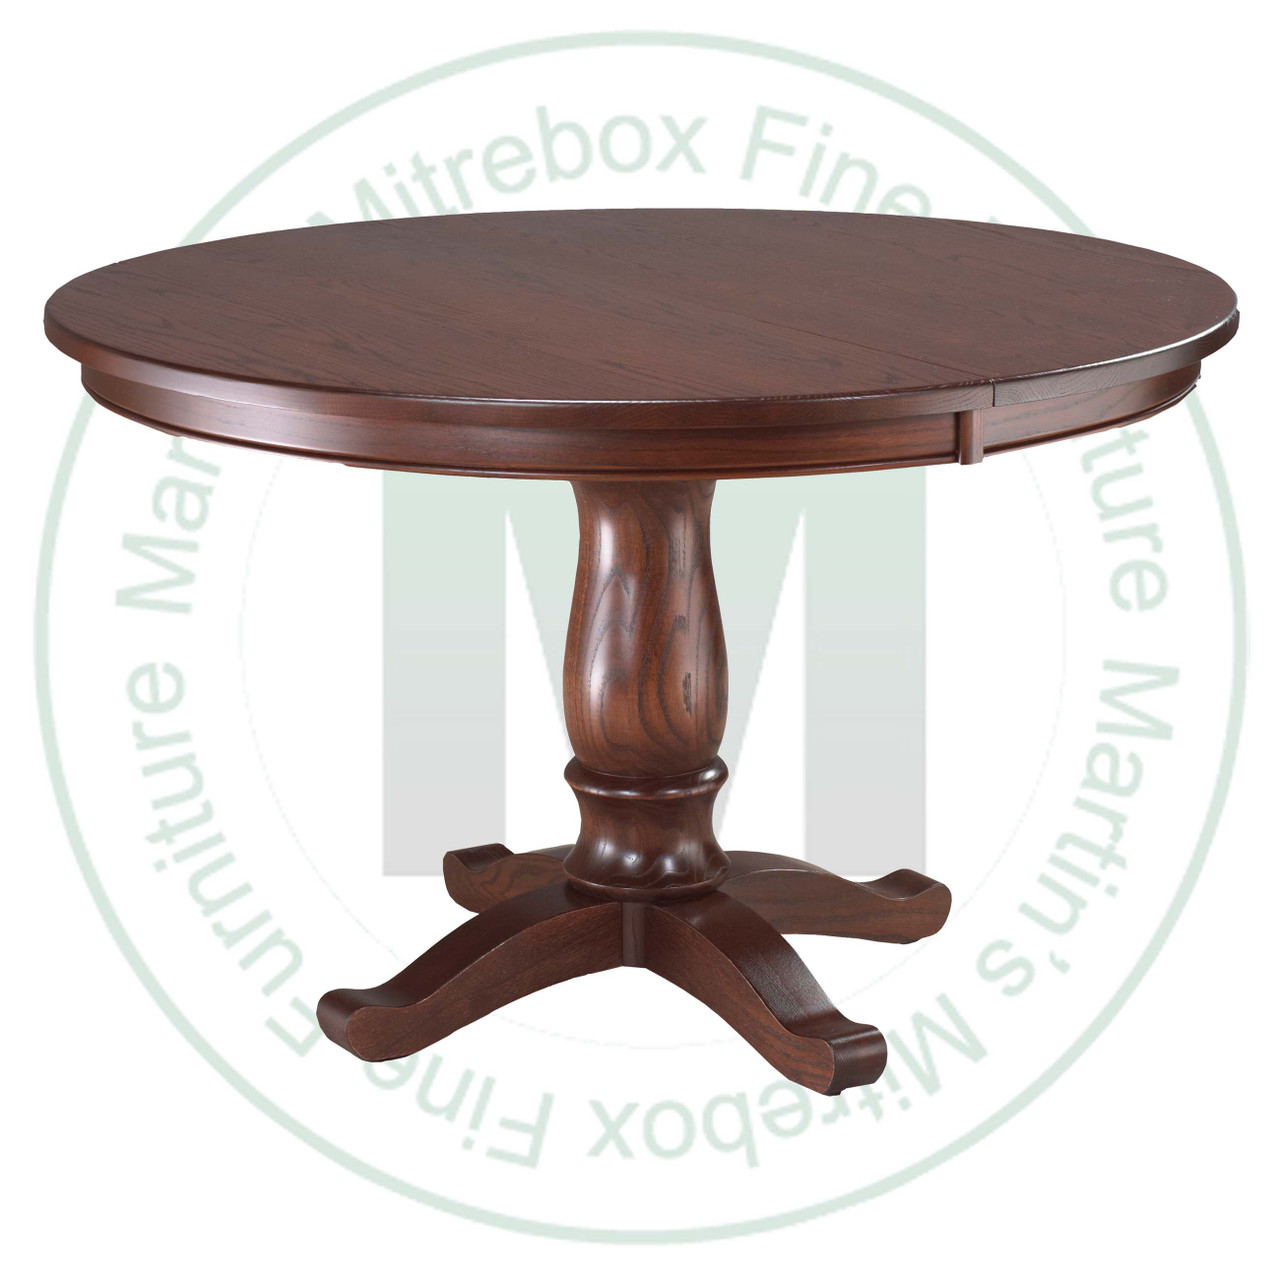 Maple Kimberly Crest Single Pedestal Table 42''D x 42''W x 30''H Round Solid Table. Table Has 1'' Thick Top.